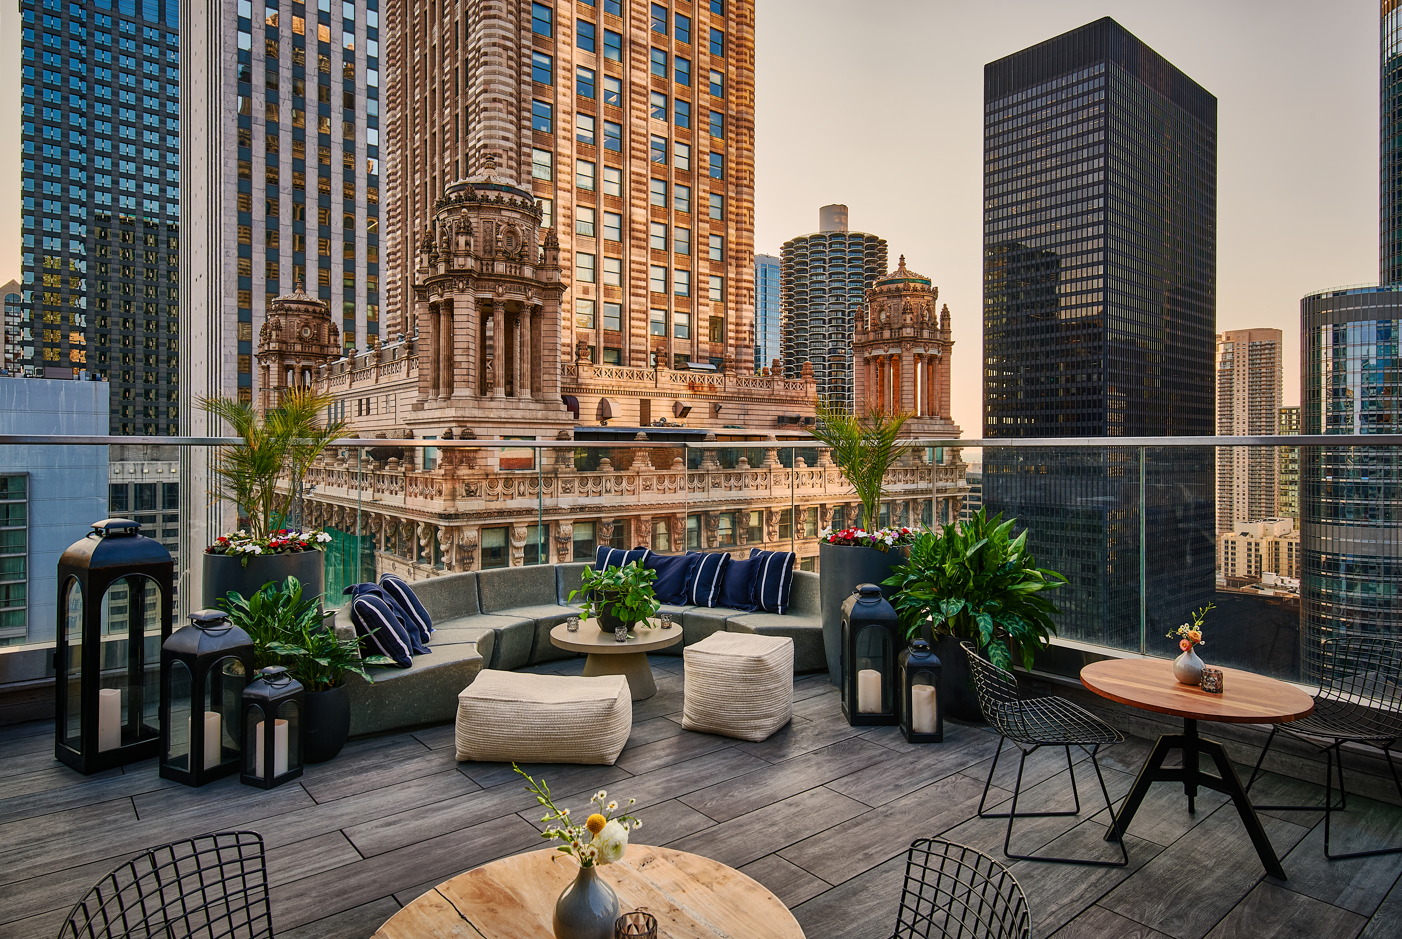 Cerise Rooftop, Chicago